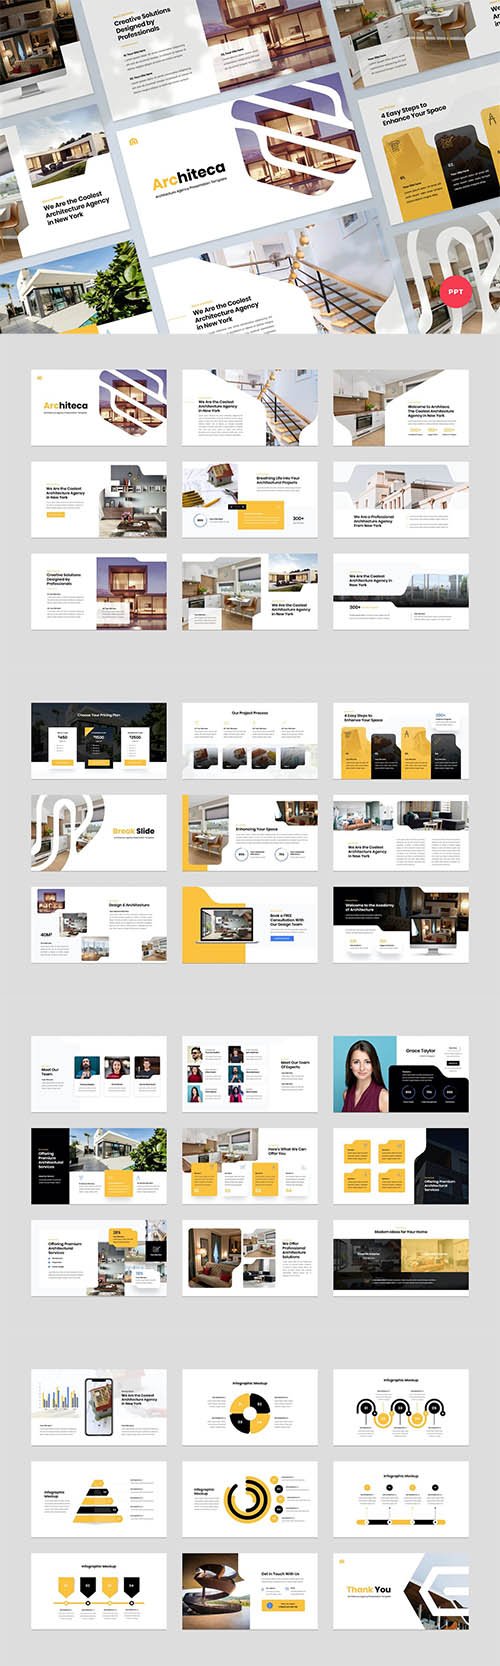 Architecture Agency & Design PowerPoint Template